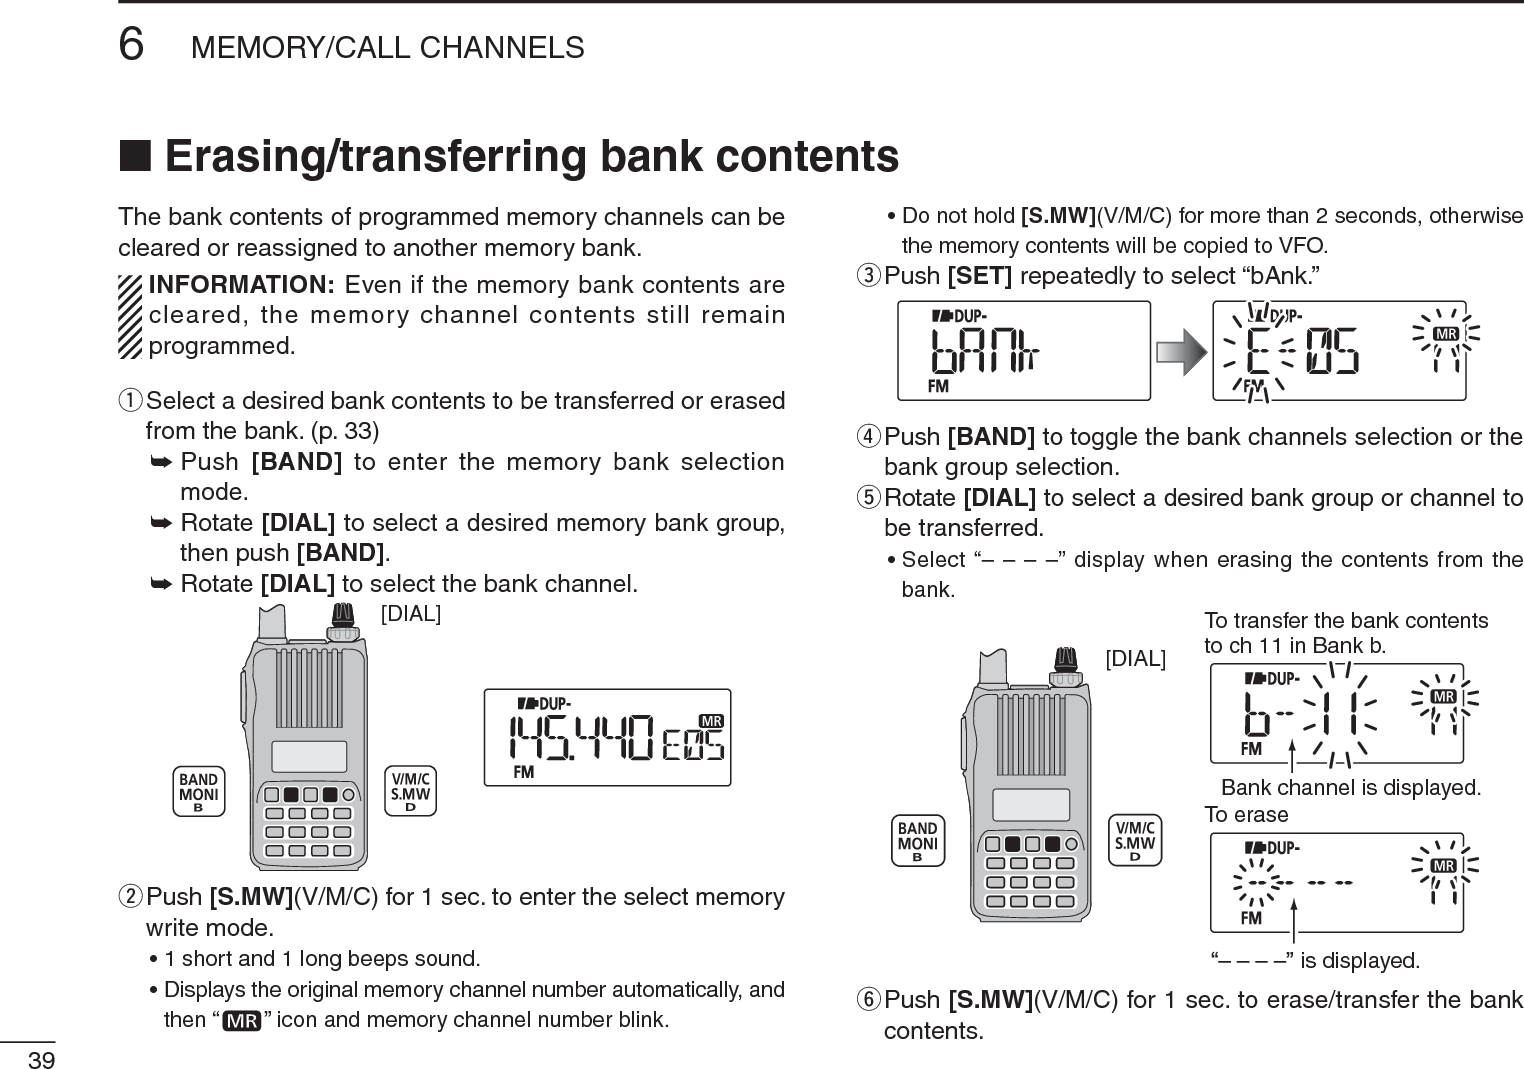 396MEMORY/CALL CHANNELSN Erasing/transferring bank contentsThe bank contents of programmed memory channels can be cleared or reassigned to another memory bank.INFORMATION: Even if the memory bank contents are cleared, the memory channel contents still remain programmed.q  Select a desired bank contents to be transferred or erased from the bank. (p. 33)±Push  [BAND] to enter the memory bank selection mode.±Rotate [DIAL] to select a desired memory bank group, then push [BAND].±Rotate [DIAL] to select the bank channel.[DIAL]w  Push [S.MW](V/M/C) for 1 sec. to enter the select memory write mode.• 1 short and 1 long beeps sound.• Displays the original memory channel number automatically, and then “ ” icon and memory channel number blink.• Do not hold [S.MW](V/M/C) for more than 2 seconds, otherwise the memory contents will be copied to VFO.e  Push [SET] repeatedly to select “bAnk.”r  Push [BAND] to toggle the bank channels selection or the bank group selection.t  Rotate [DIAL] to select a desired bank group or channel to be transferred.• Select “– – – –” display when erasing the contents from the bank.[DIAL]To transfer the bank contentsto ch 11 in Bank b.To eraseBank channel is displayed.is displayed.y  Push [S.MW](V/M/C) for 1 sec. to erase/transfer the bank contents.